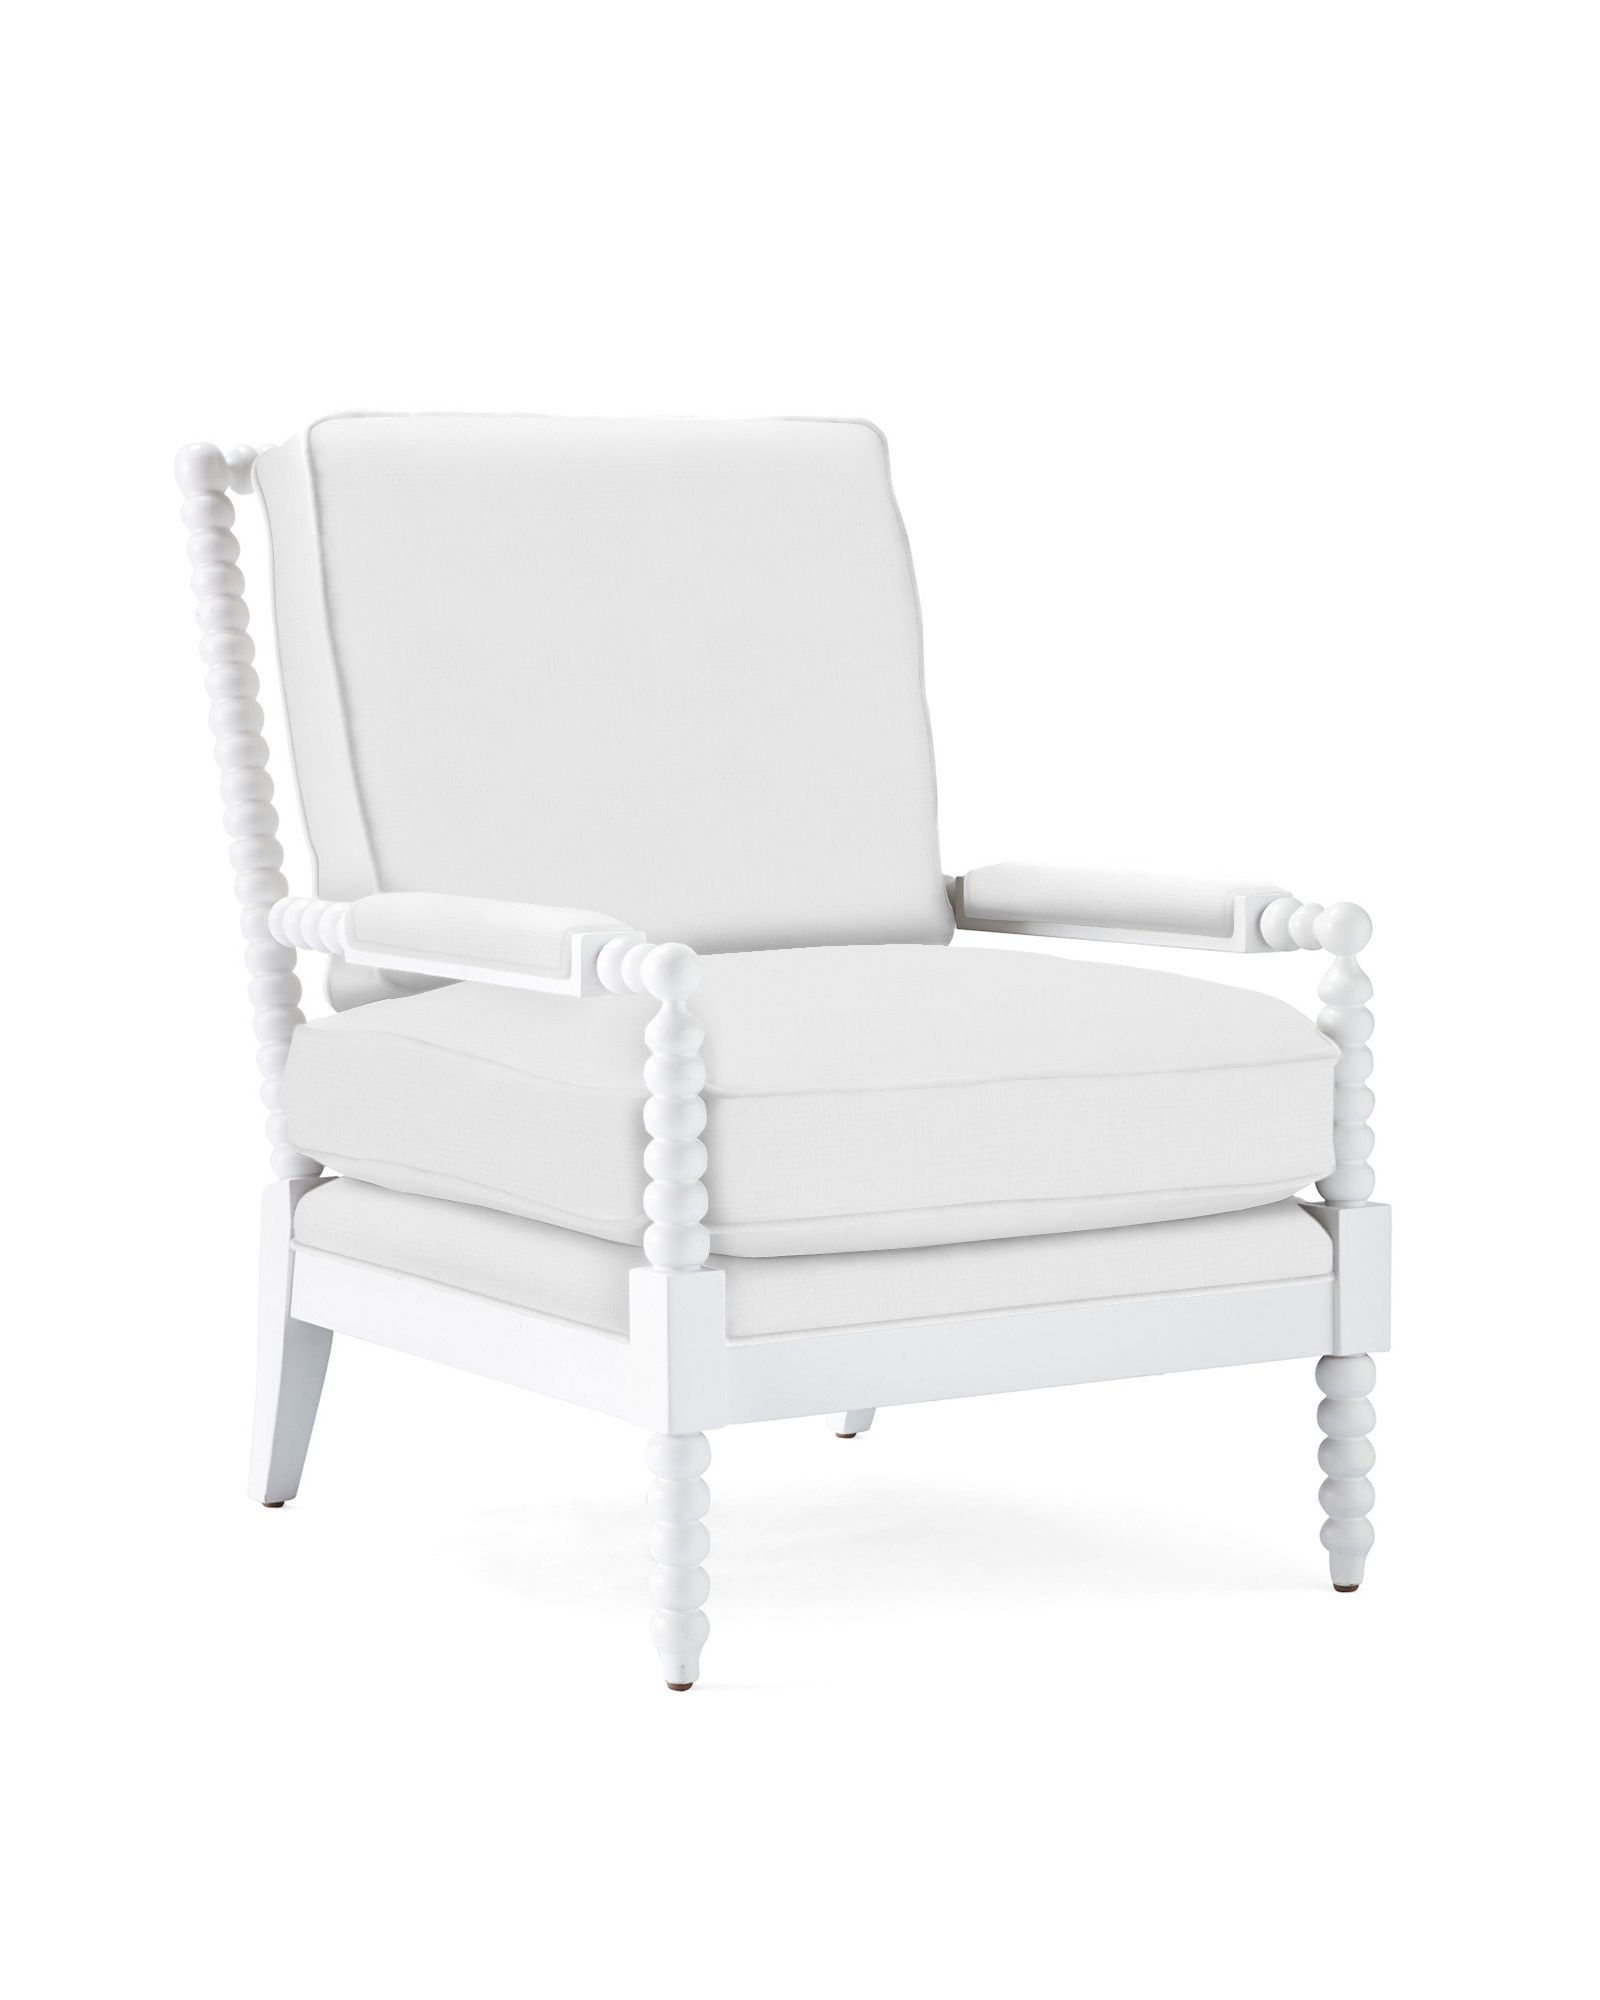 Beckett Chair - White | Serena and Lily